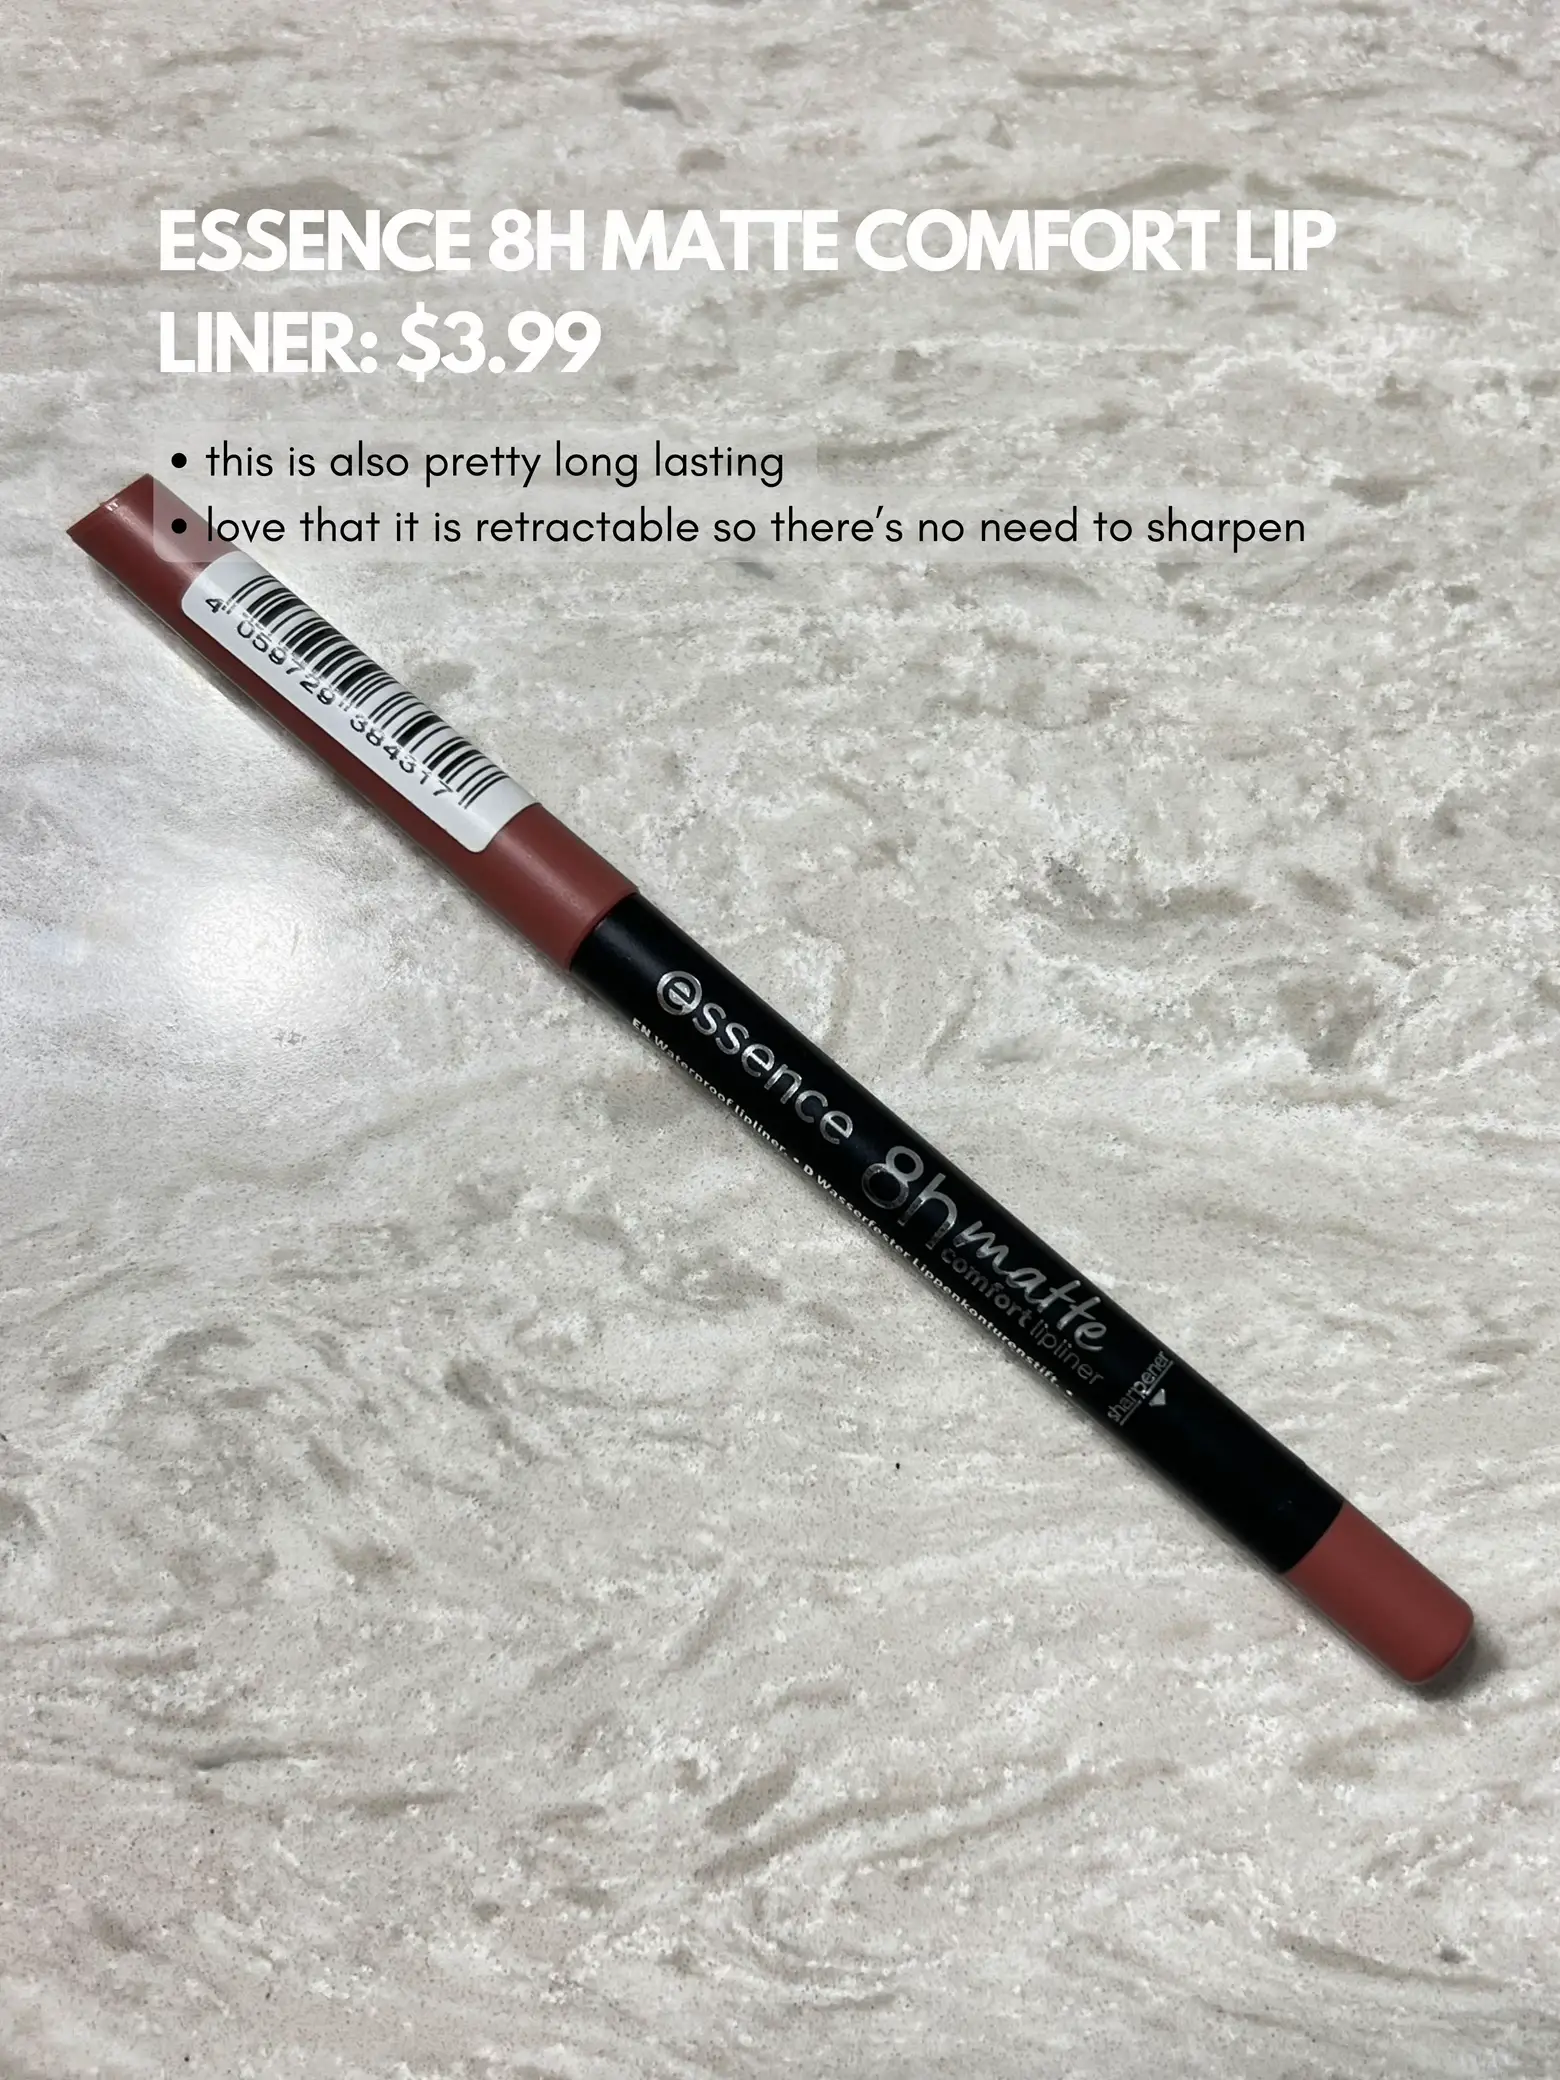 Have @nyxcosmetics_uk changed their lip liner formula!? Please